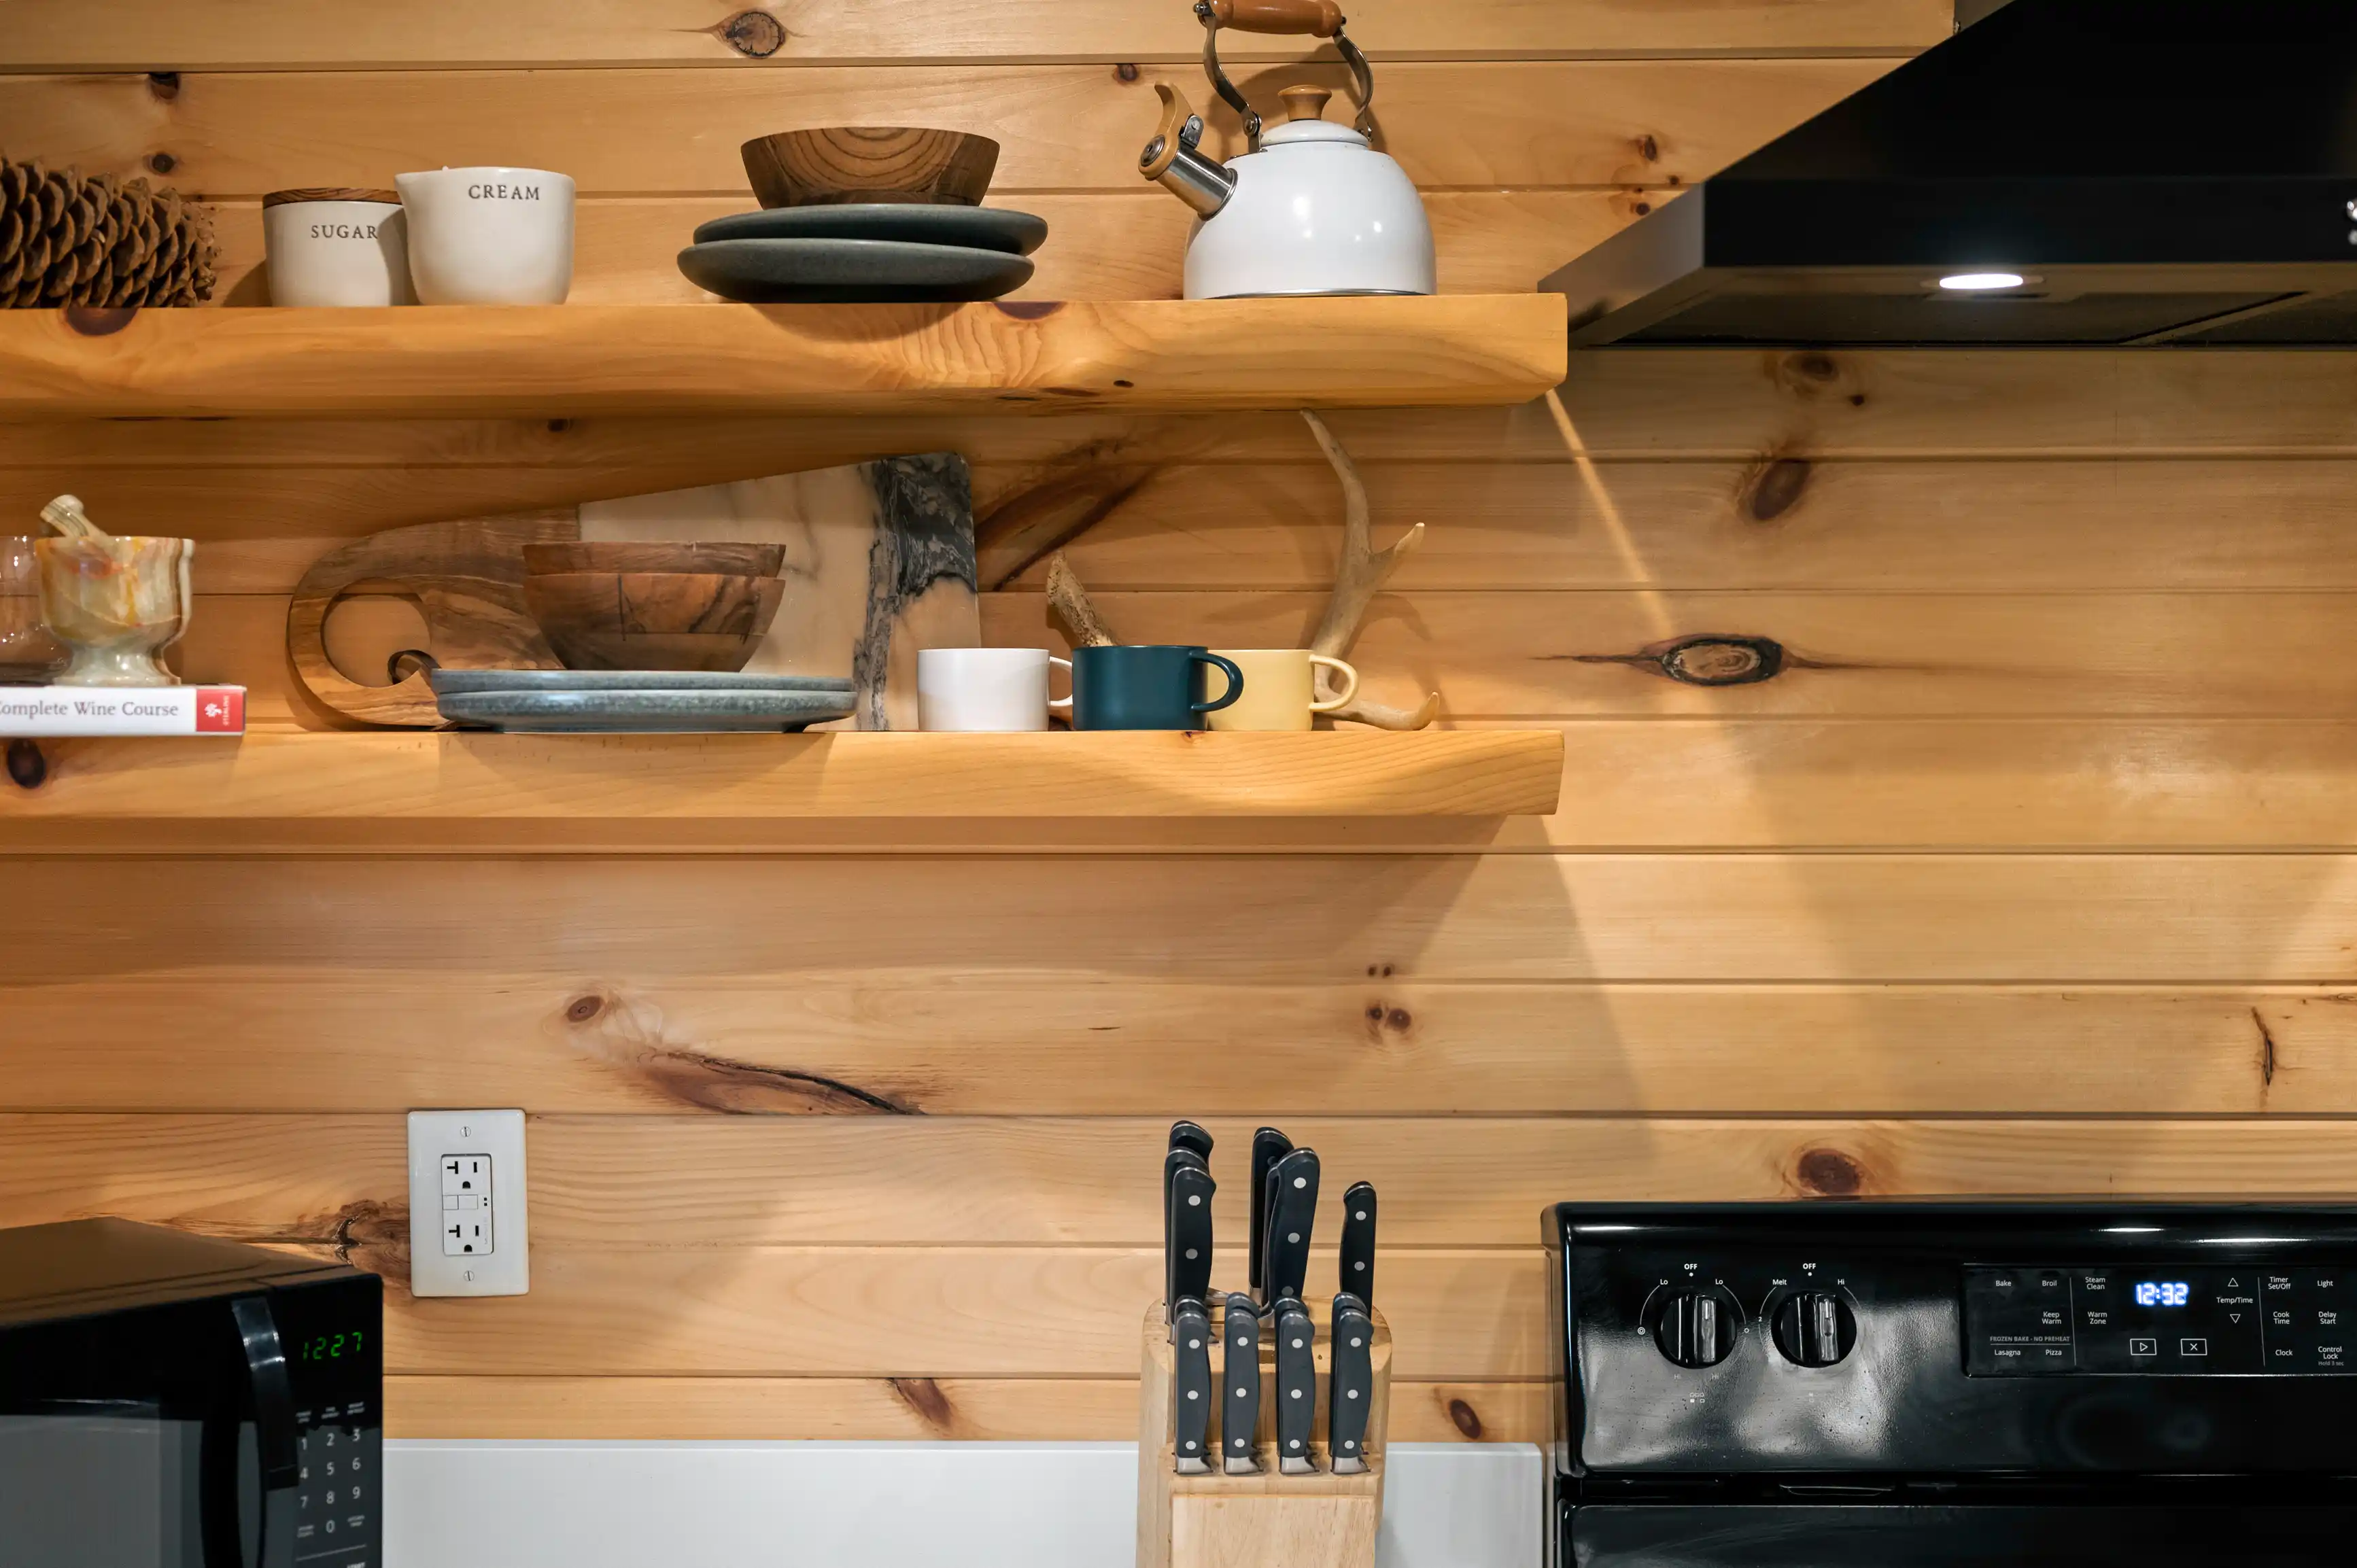 A cozy kitchen interior with wooden shelves displaying utensils, cups, and a kettle, above a stove and a set of knives to the side.